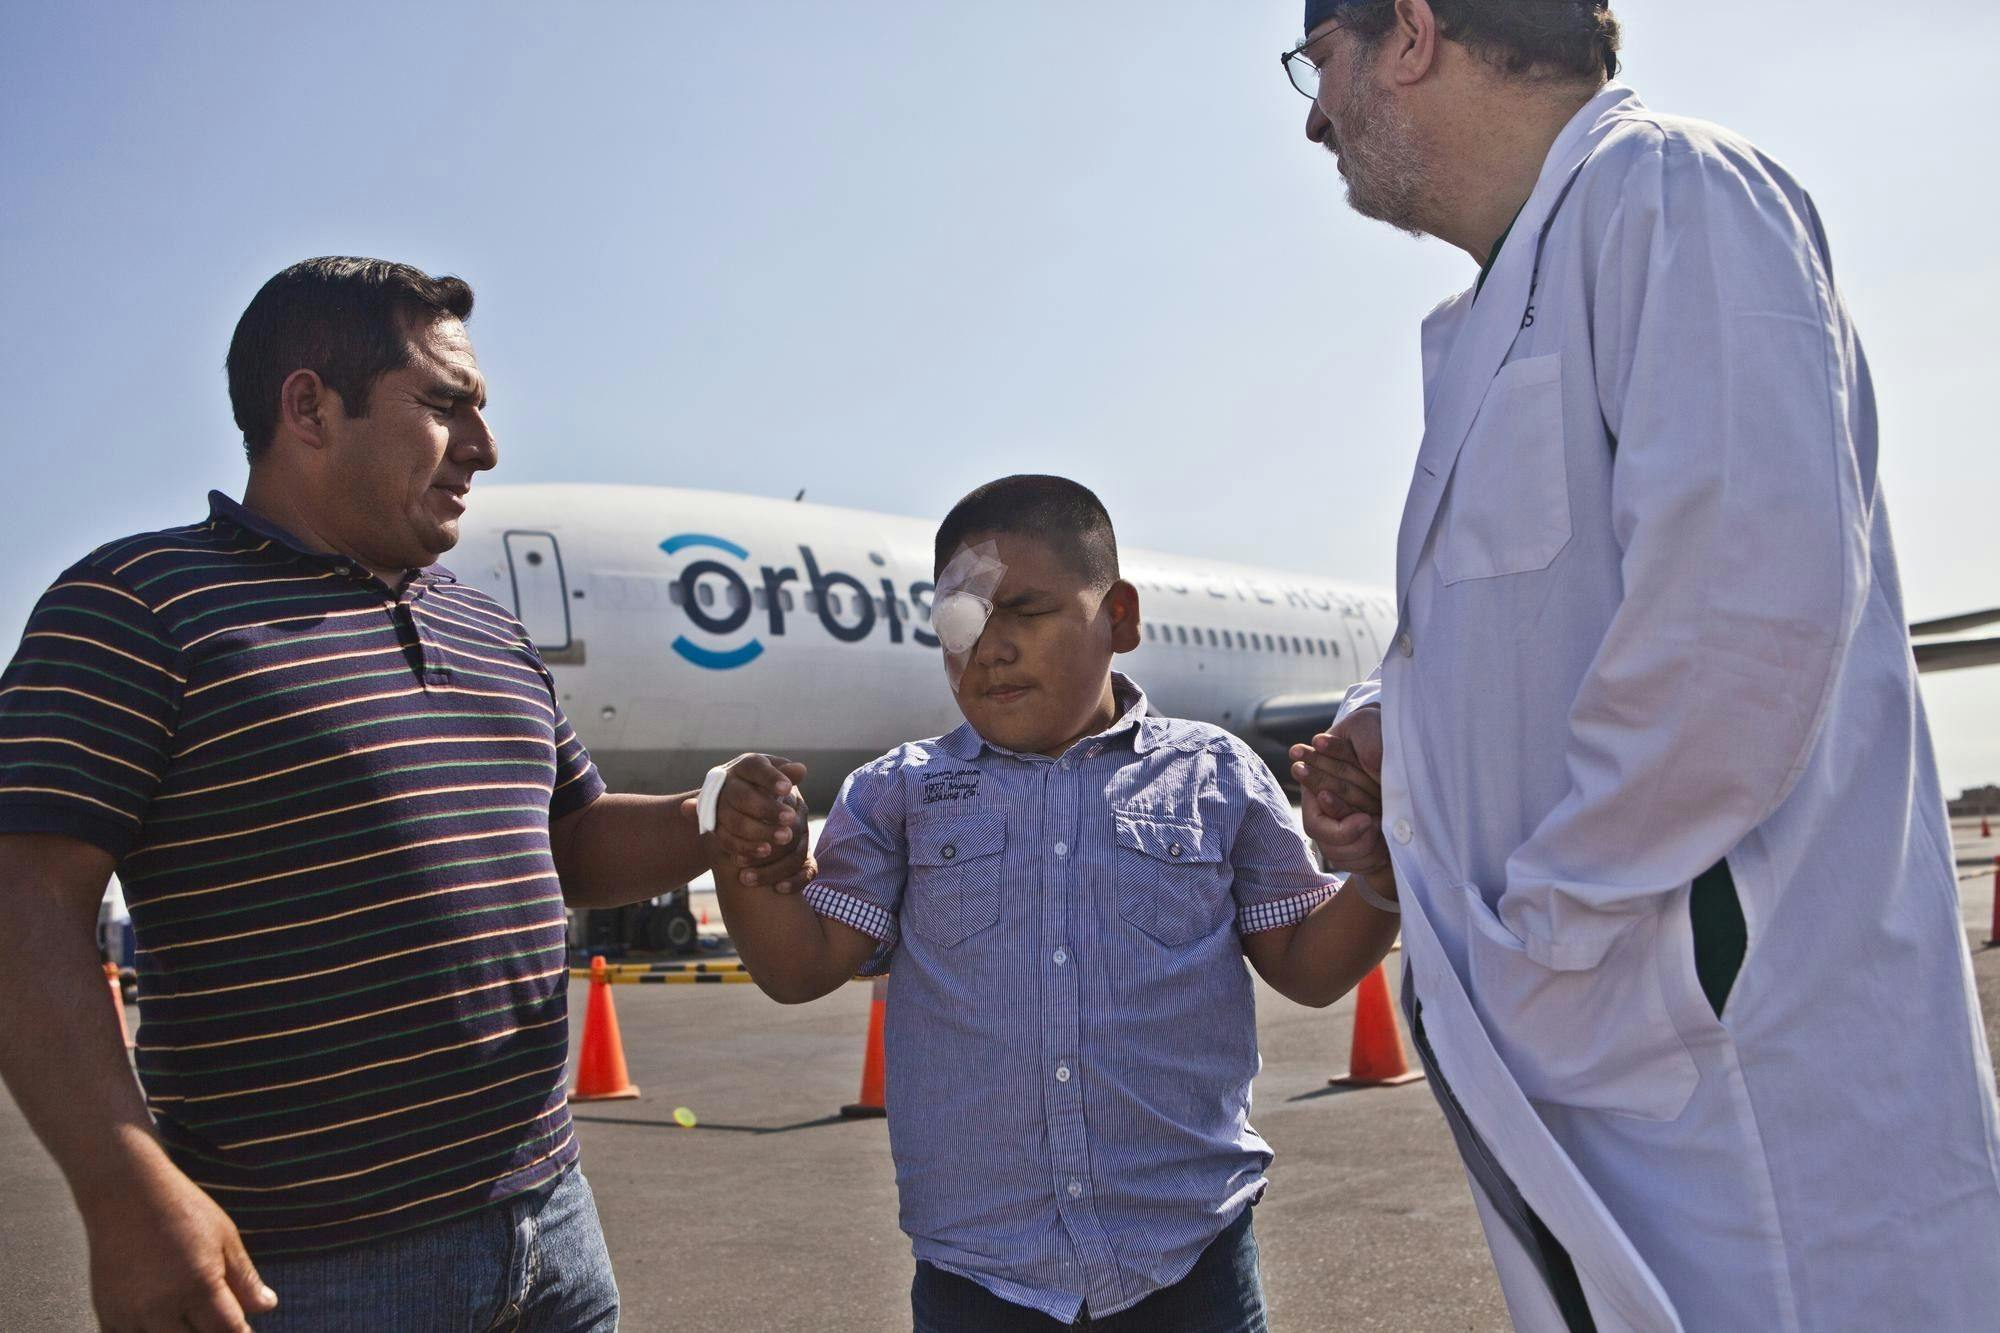 World Sight Day: Orbis, UC Davis team up to train eye care teams from Latin America to fight avoidable blindness